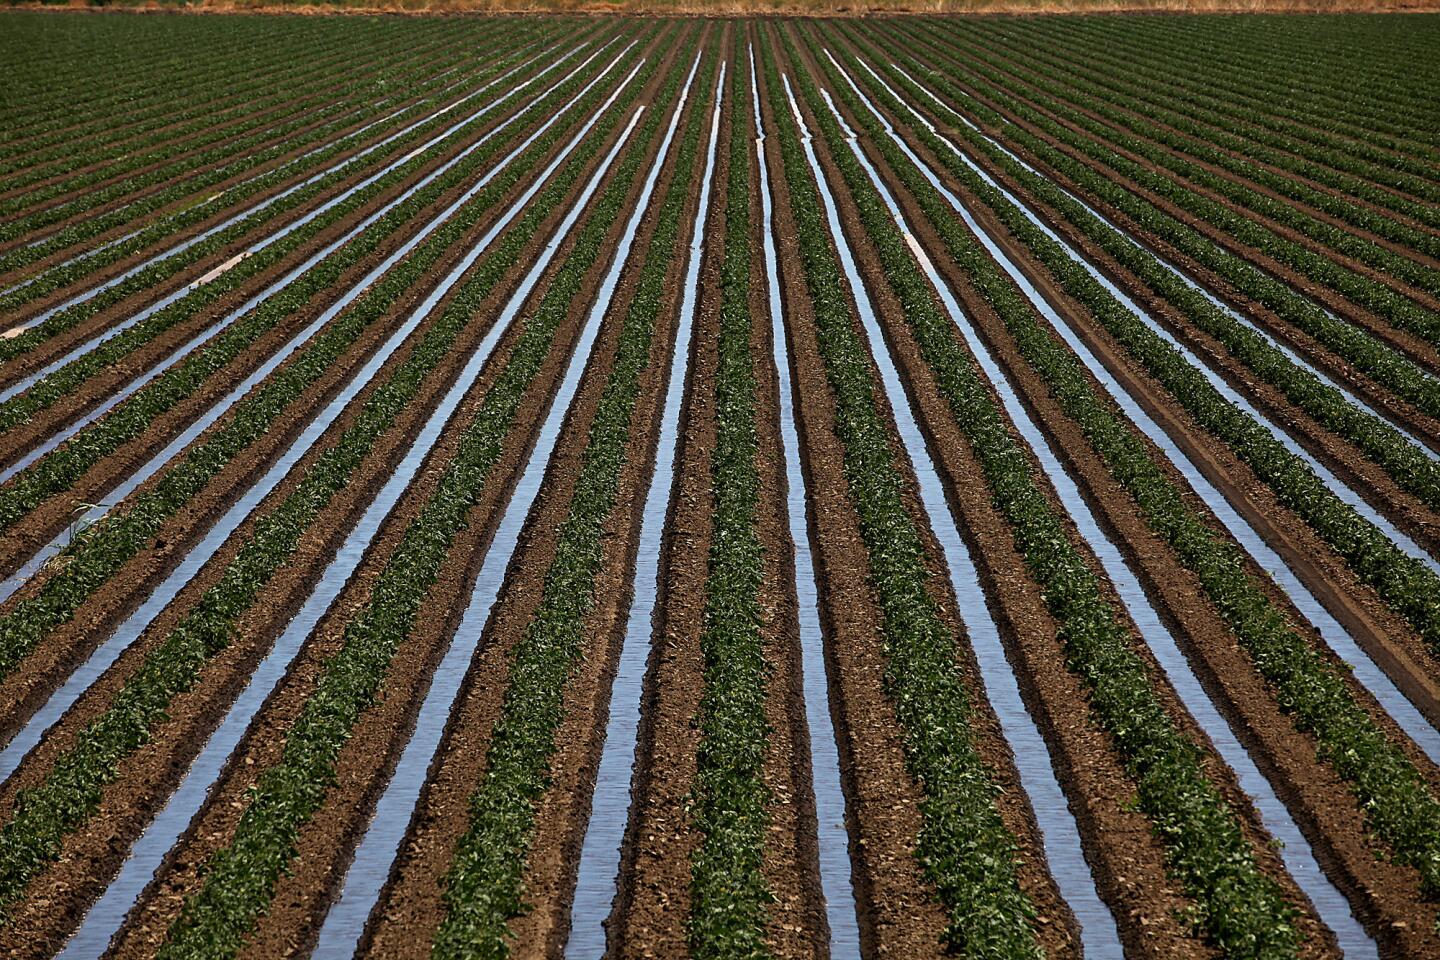 Irrigated rows